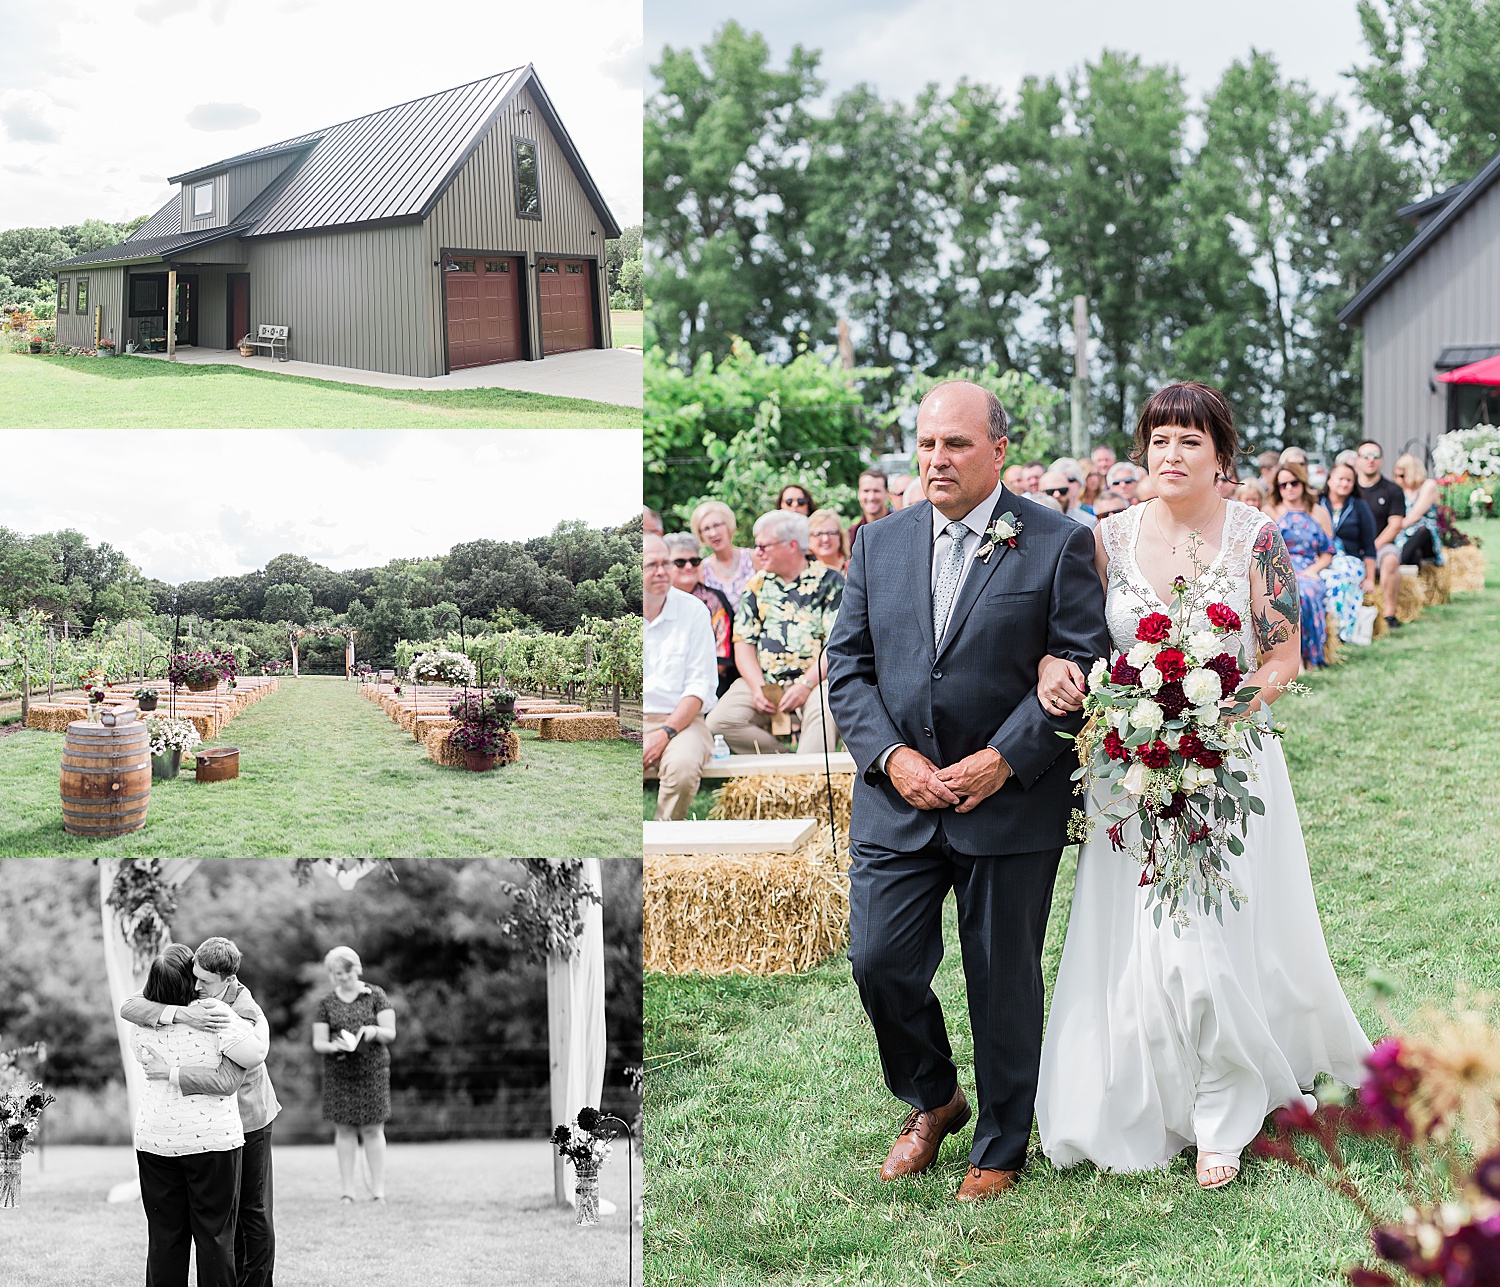 father of bride walks daughter down the aisle during wedding ceremony at Minnesota vineyard wedding 